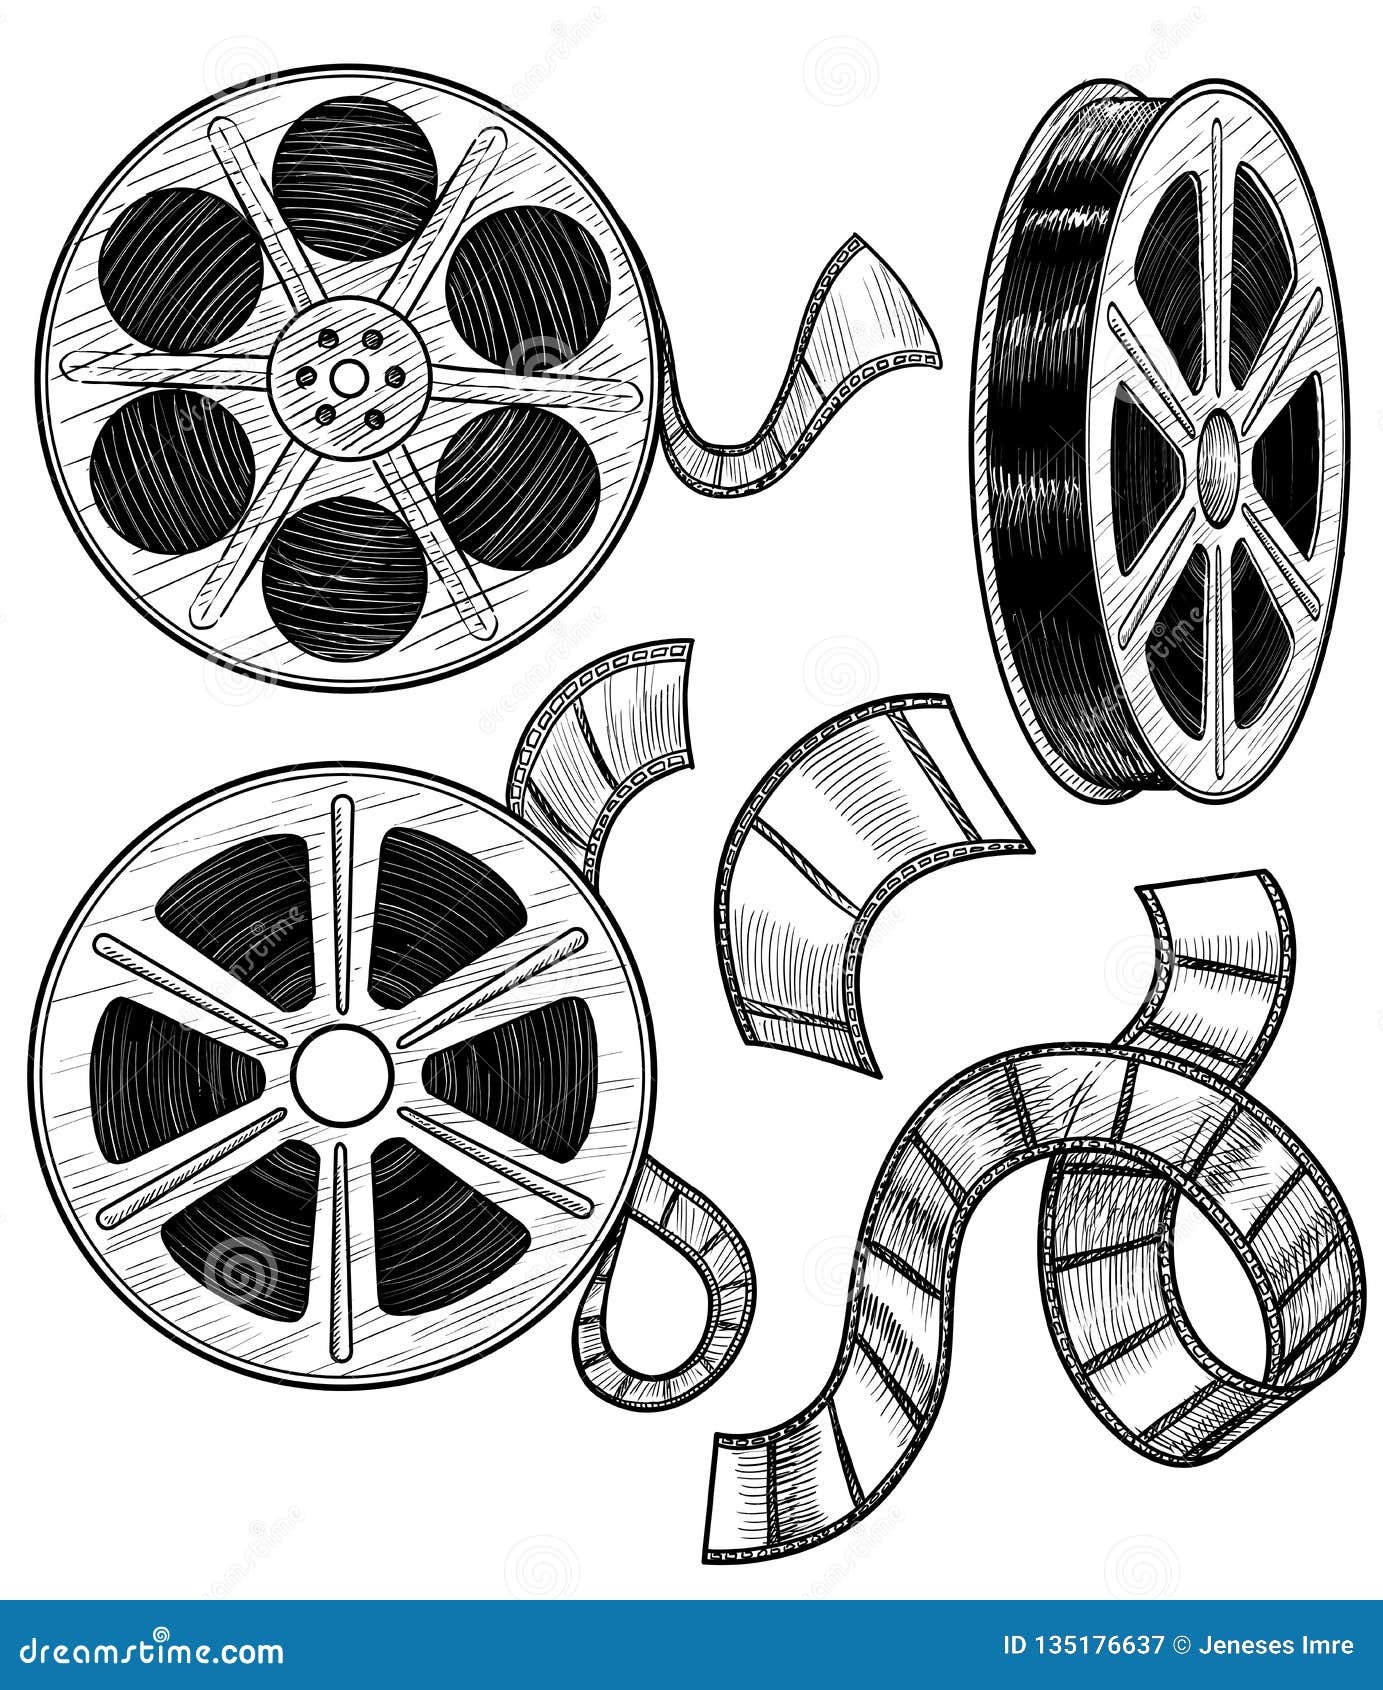 Film Reel Drawing On Lined Paper High-Res Vector Graphic - Getty Images